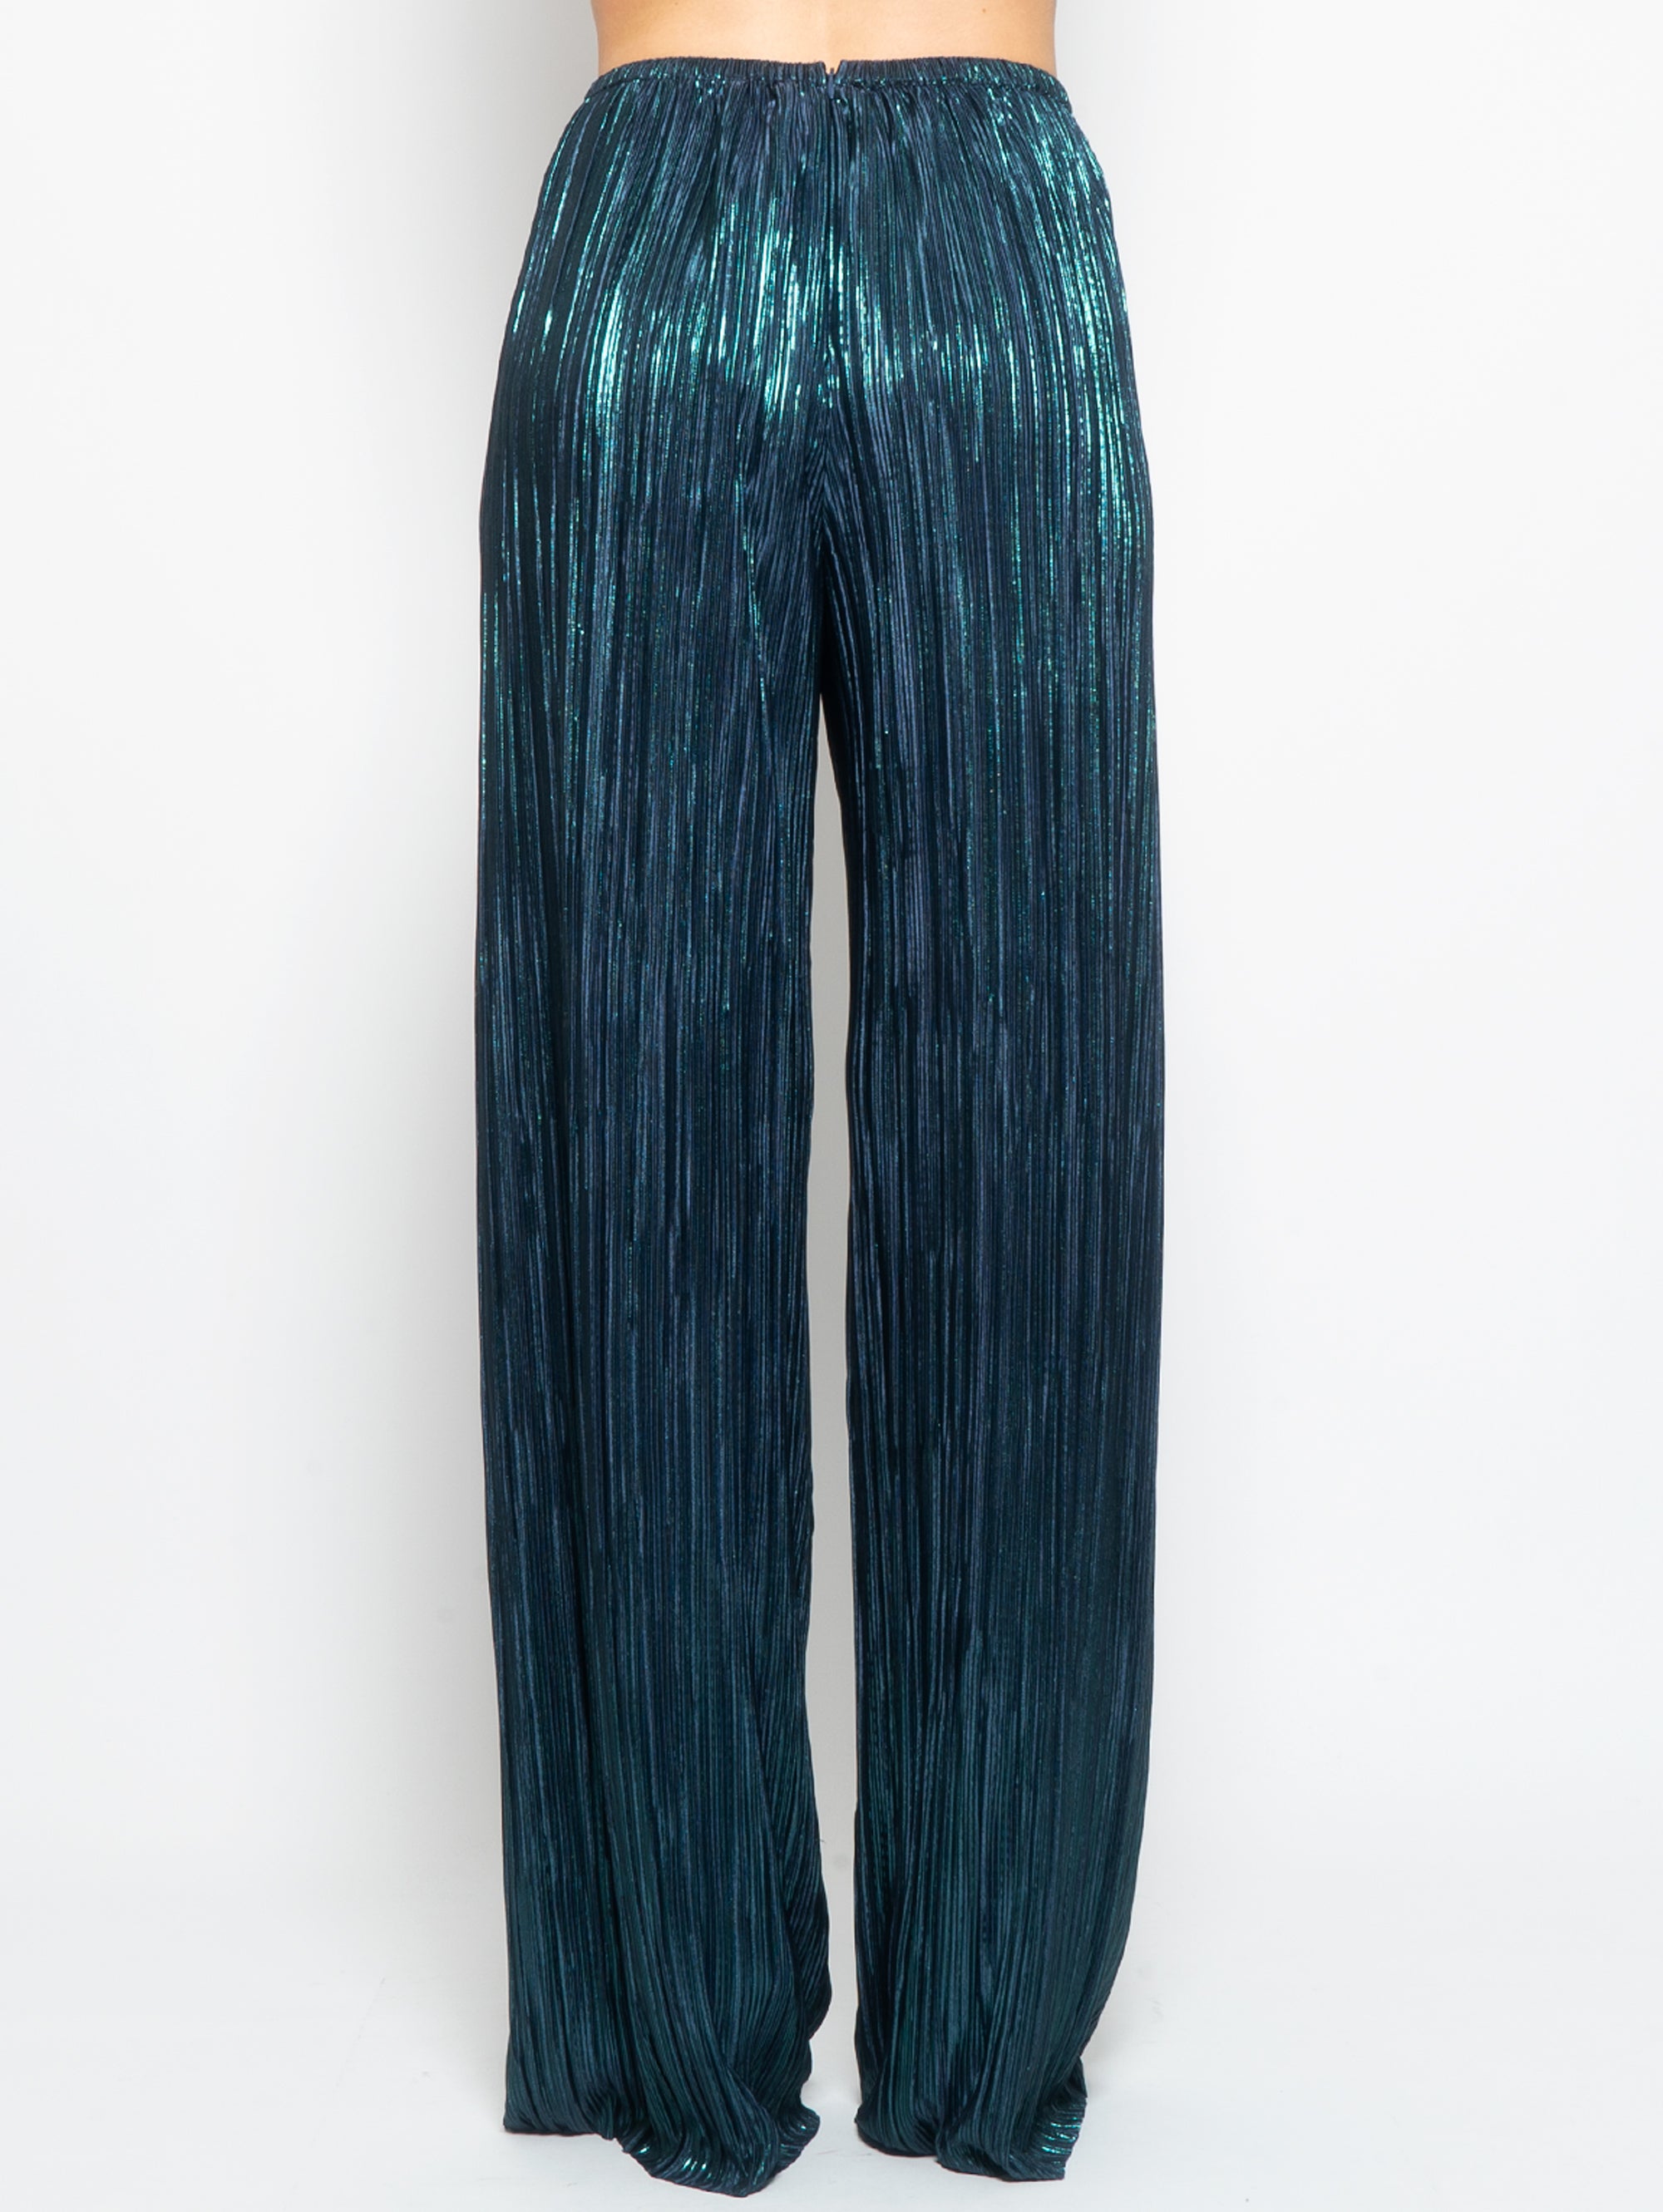 Wide trousers in blue/green pleated fabric